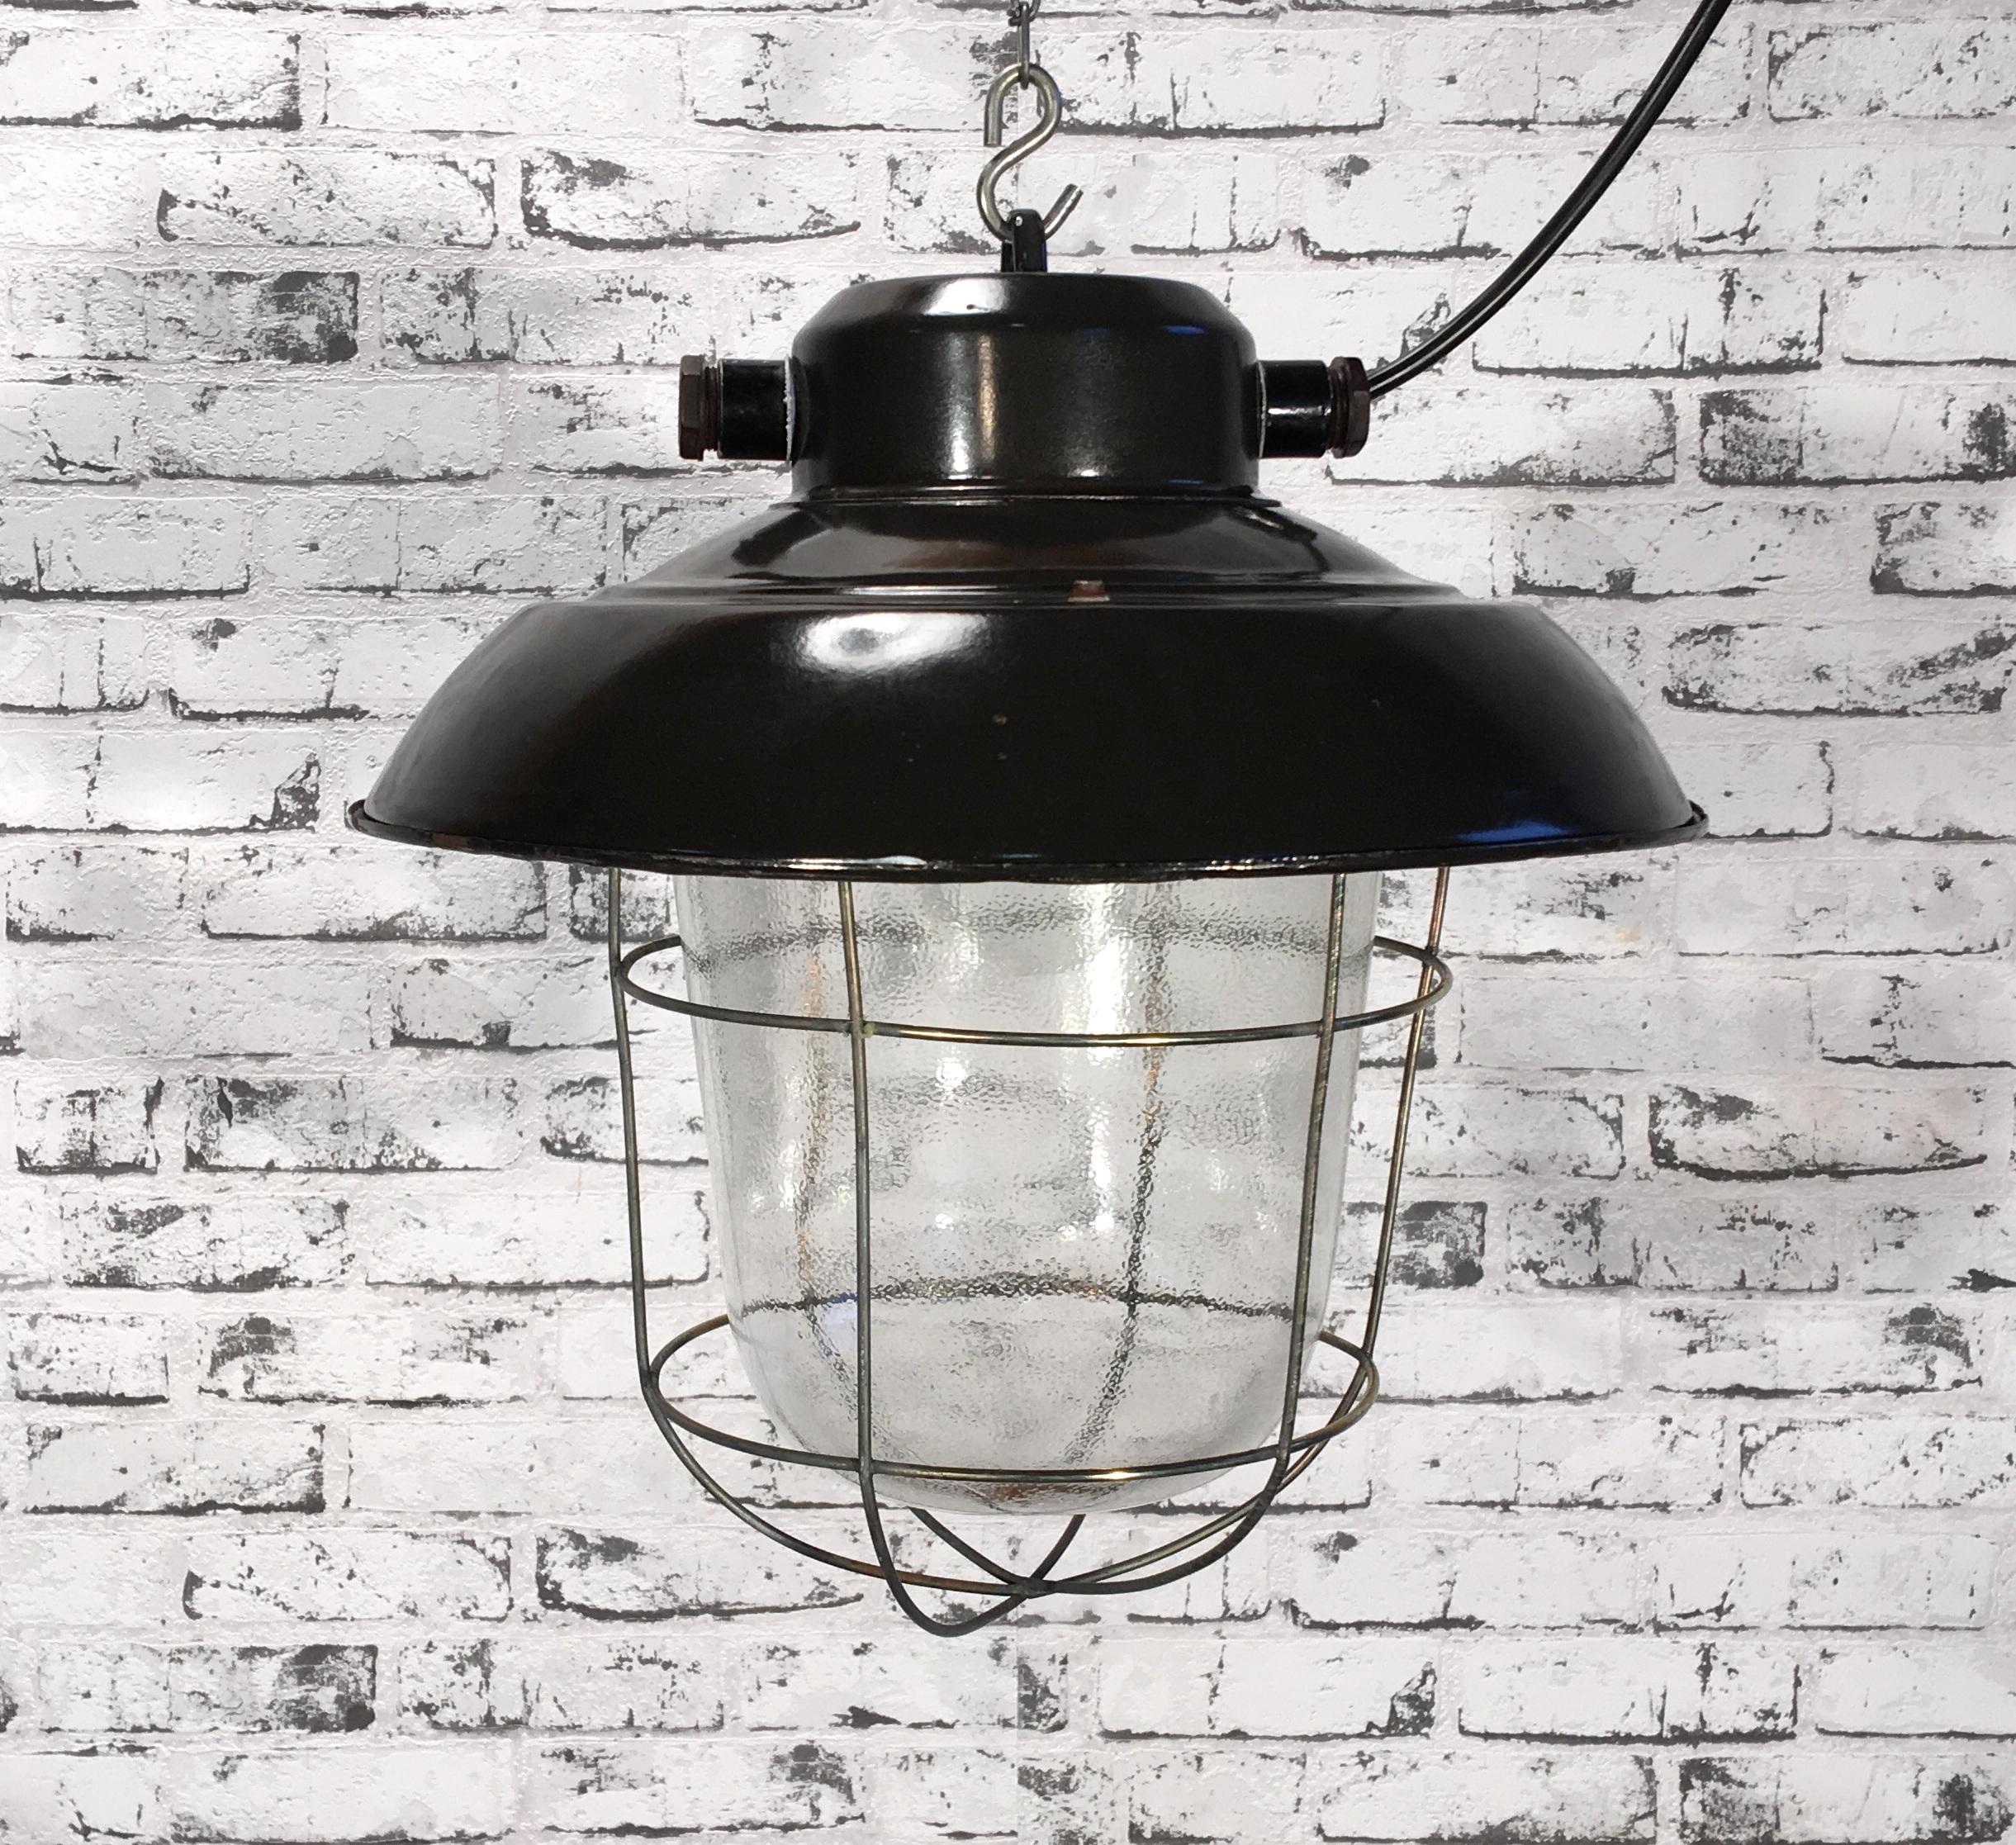 - Vintage Industrial lamp from former Czechoslovakia made during the 1960s
- Black enamel shade with white interior
- Frosted glass, Iron grid
- New porcelain socket for E 27 lightbulbs and wire, Weight: 4 kg
- Fully functional.